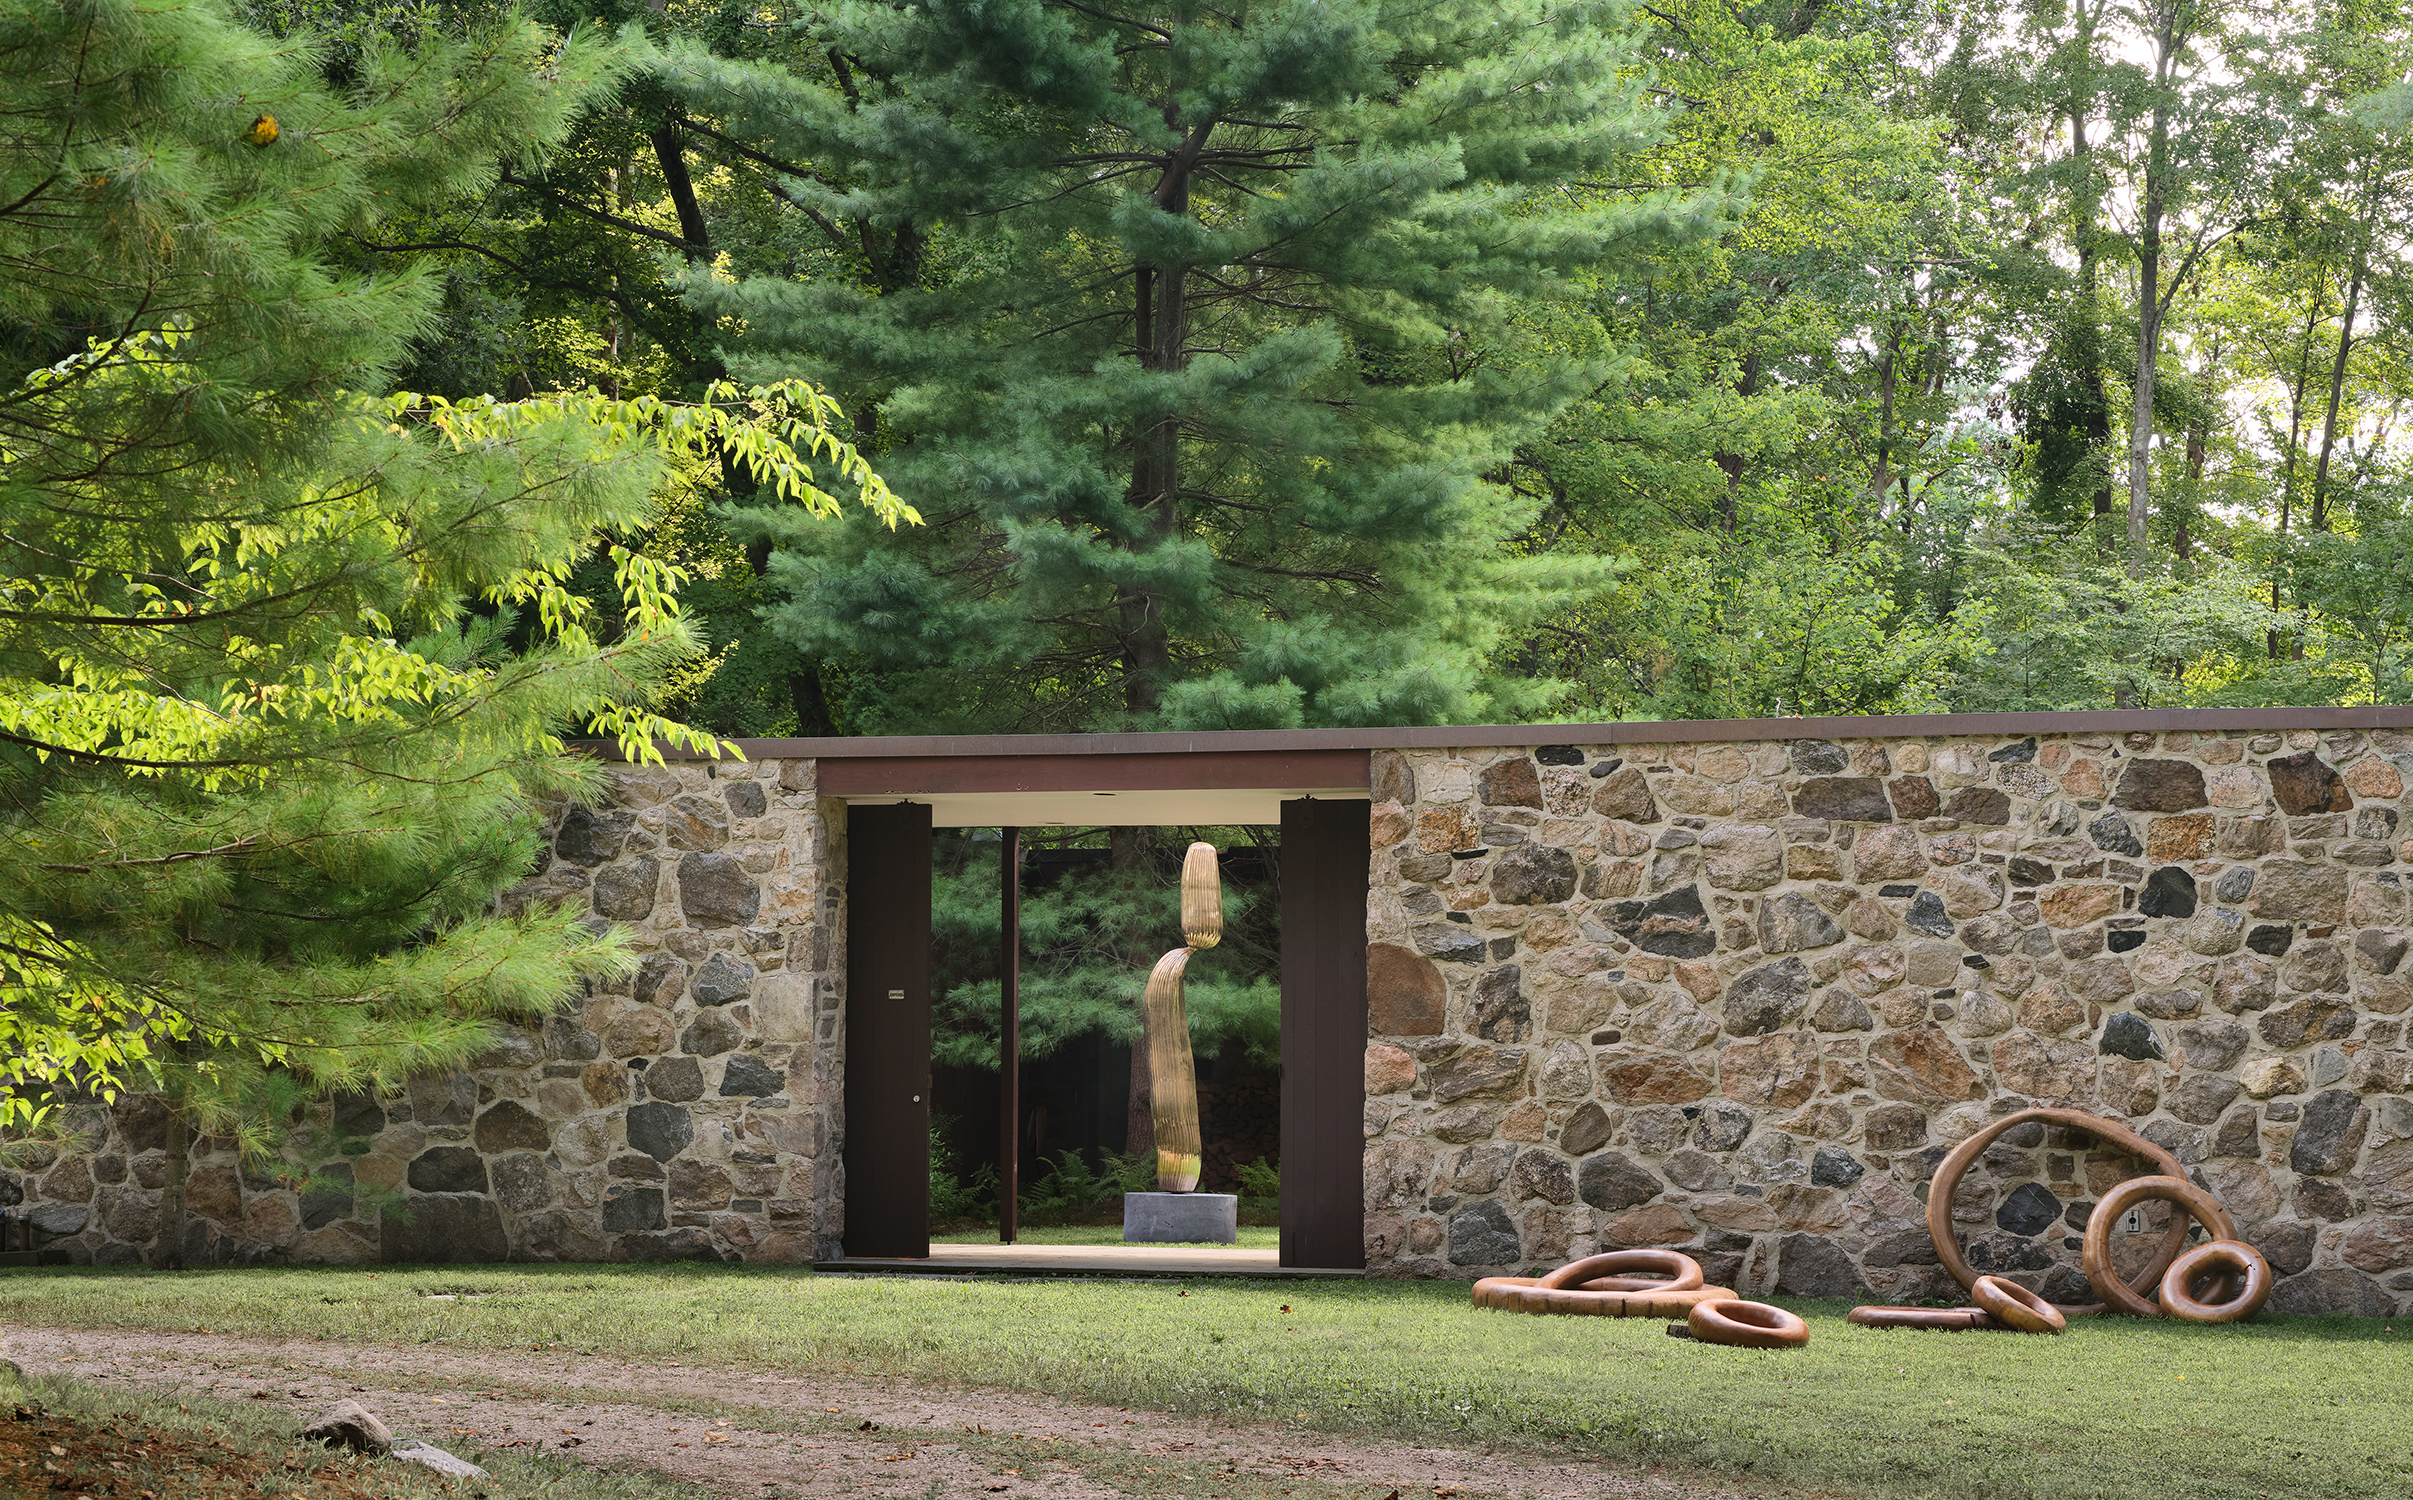 At The Noyes House: Blum & Poe, Mendes Wood DM and Object & Thing. The Noyes House, New Canaan, Connecticut. Photo by Michael Biondo. Works pictured [left to right]: Alma Allen, Not Yet Titled (2020); Hugo França, Rings (2007).